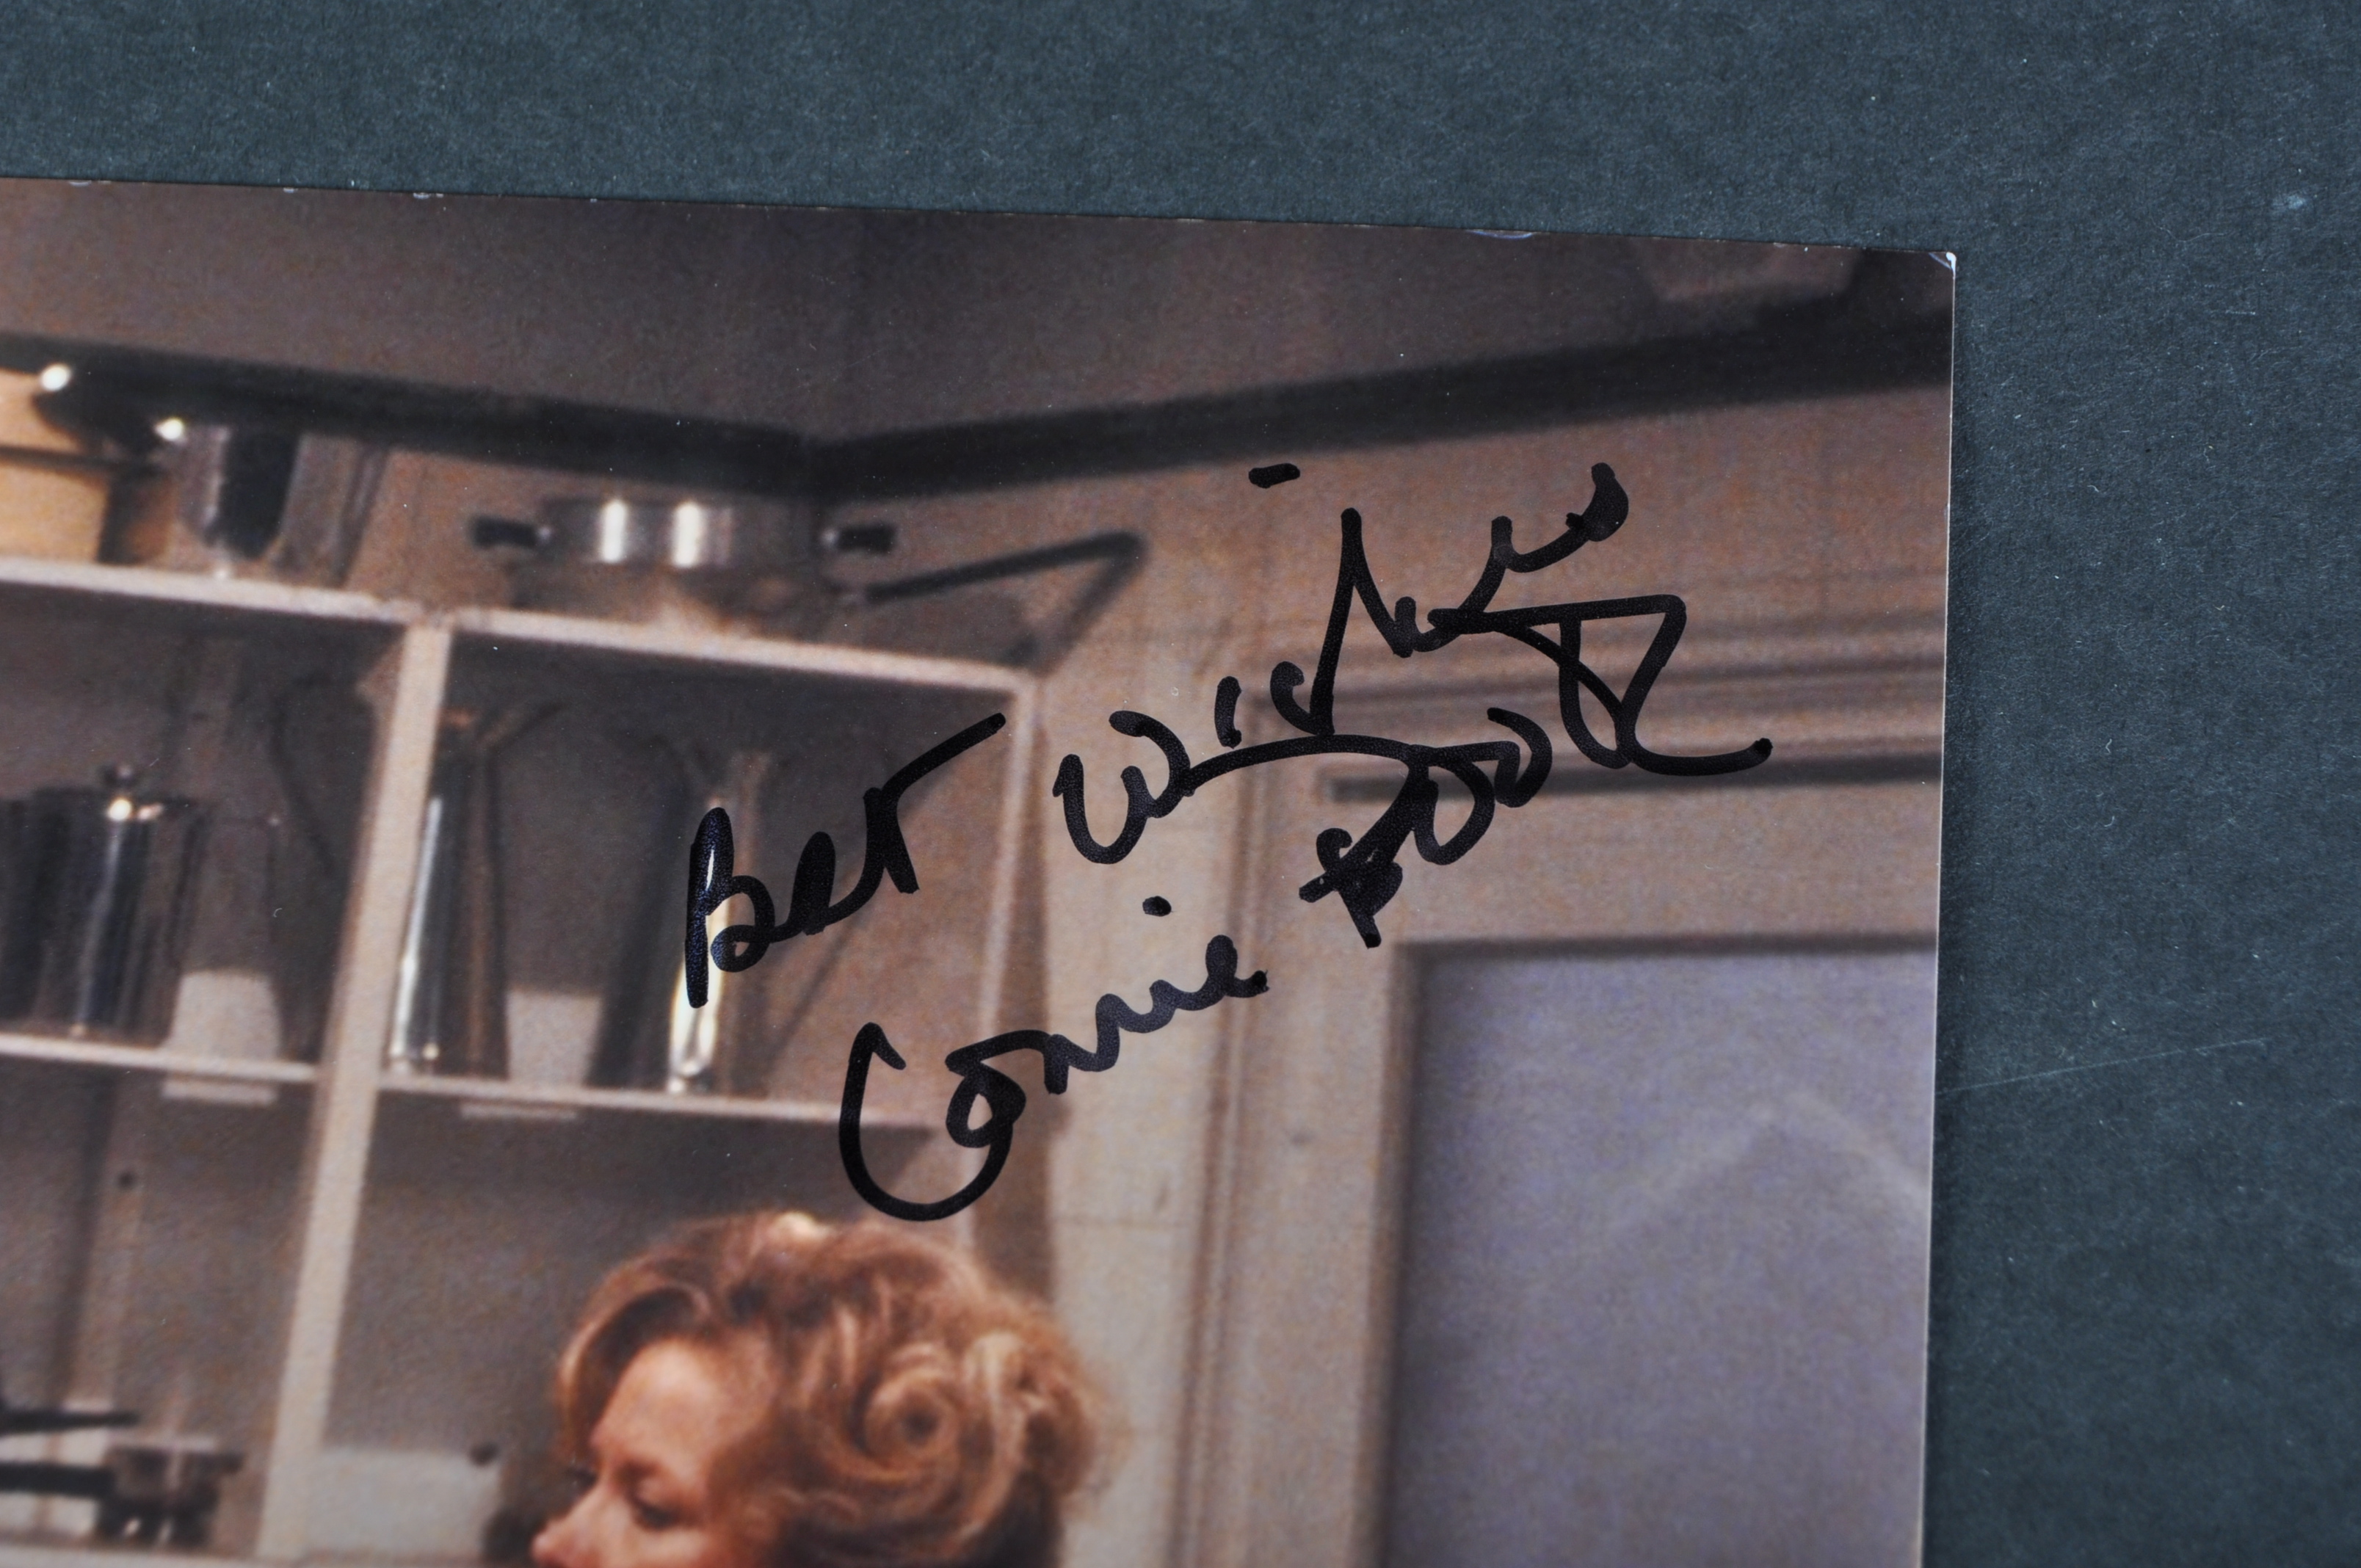 FAWLTY TOWERS - CONNIE BOOTH - AUTOGRAPHED 8X10" PHOTO - Image 2 of 2